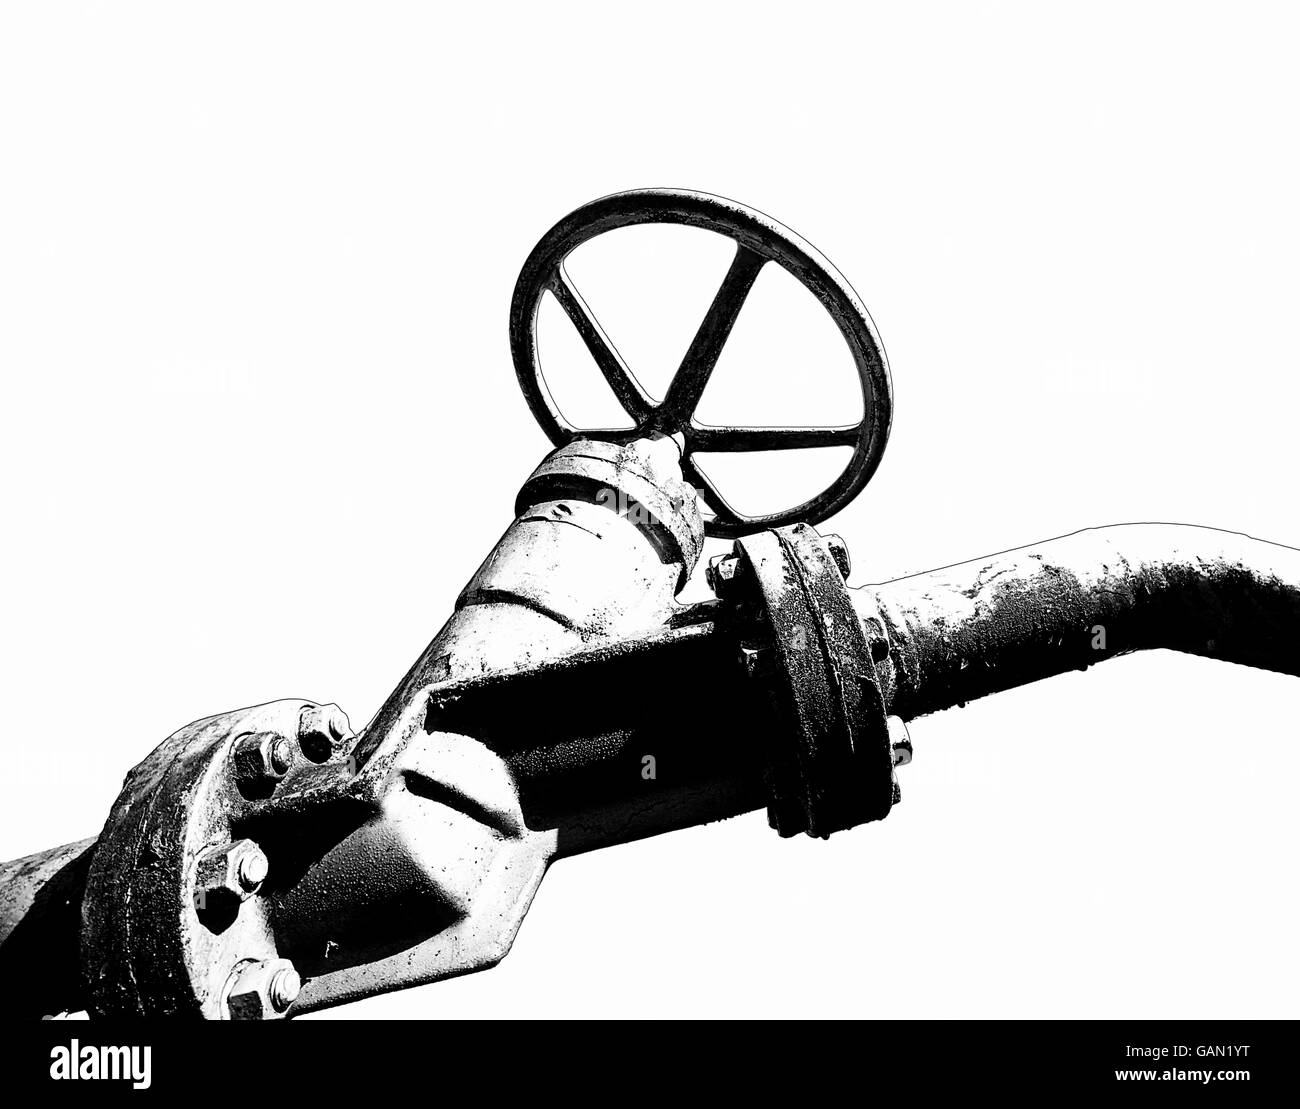 Safety relief valve and closing valve of an industrial plant Stock Photo